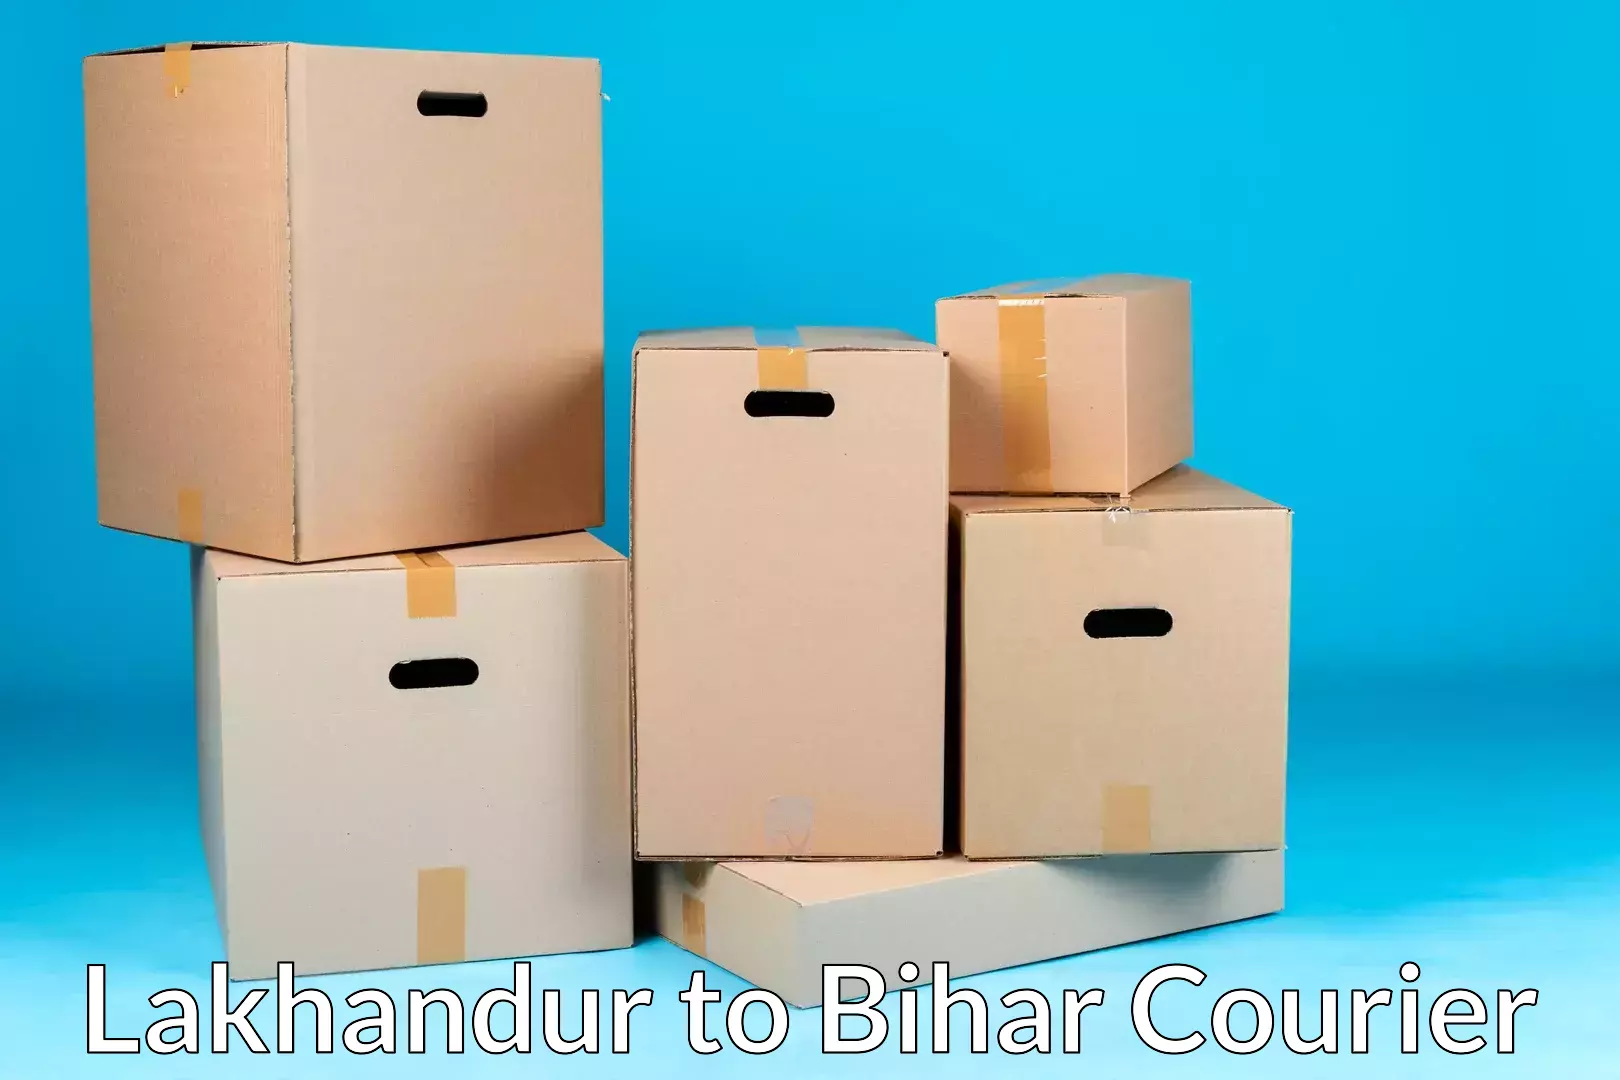 Skilled furniture movers in Lakhandur to Bihar